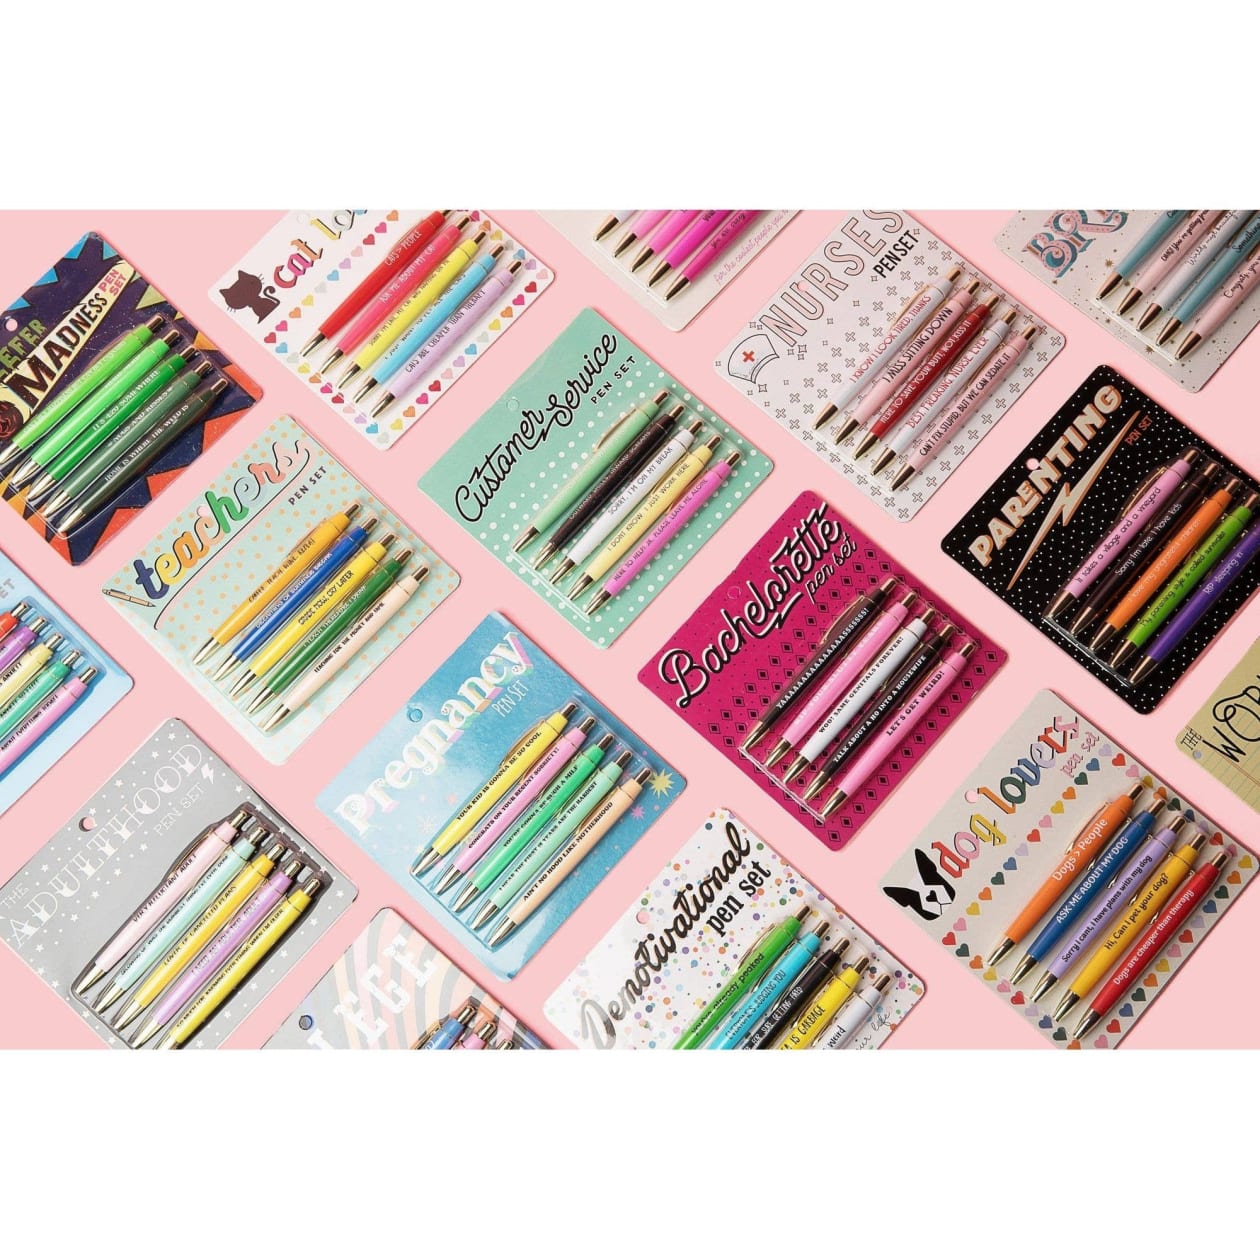 Fun Club Nurses Multicolor Pen Set | 5 Funny Pens Packaged for Gifting | Best. Freaking. Nurse. Ever. , I Miss Sitting Down